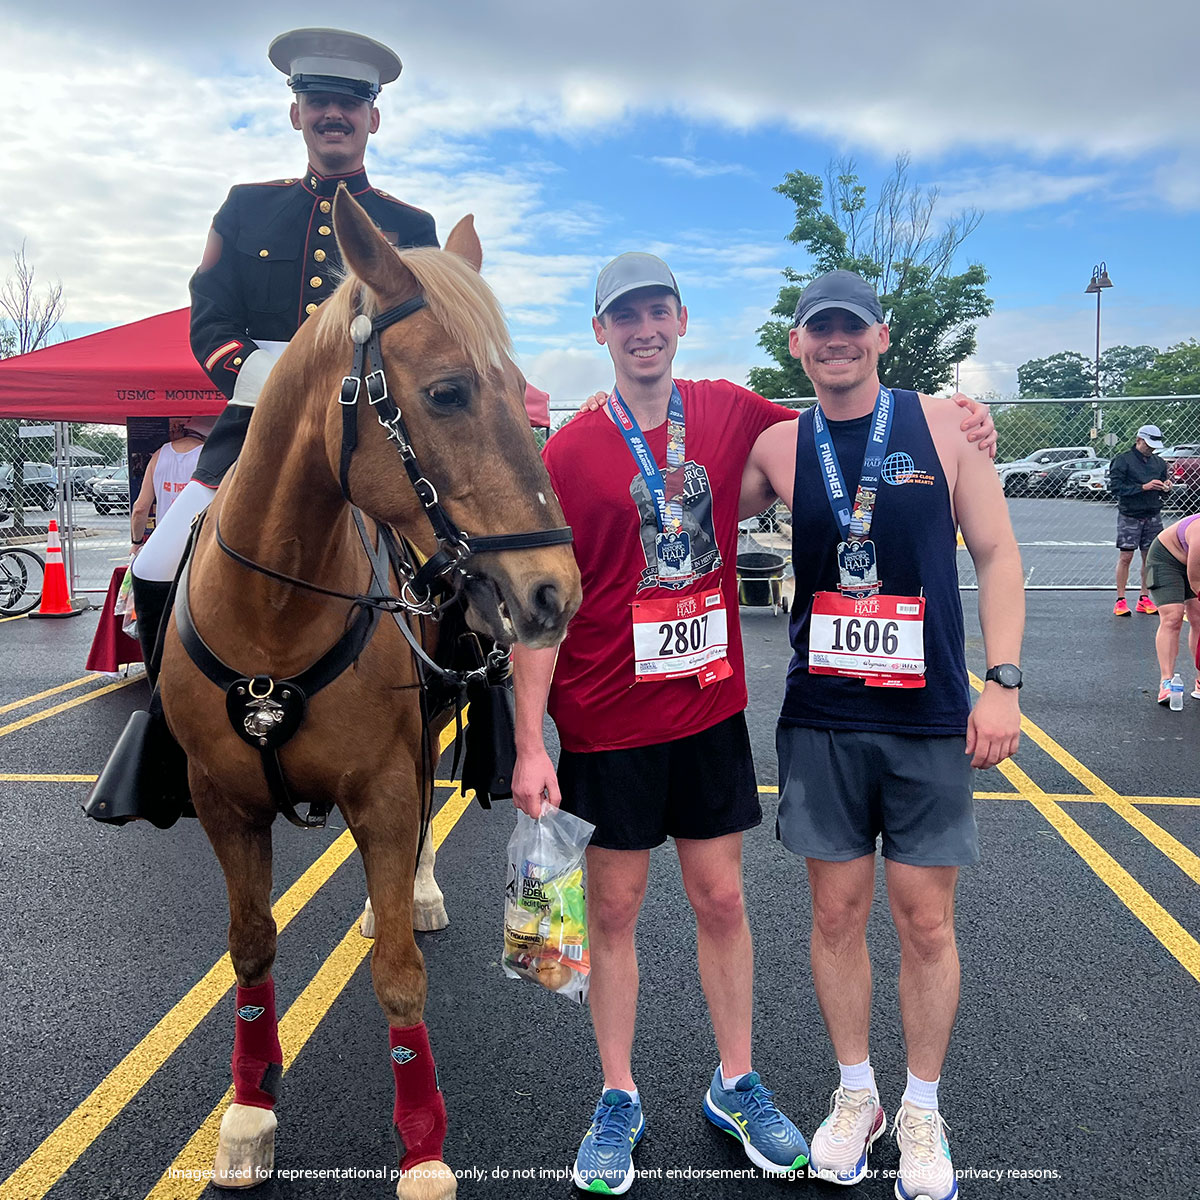 Left, right, left! We were proud to support the Marine Corps Historic Half runners as they took on the 13.1 miles winding them through Fredericksburg, VA, this past weekend. @Marine_Marathon #RunWithNavyFed #RunWIthTheMarines #GreatestHalfinHistory